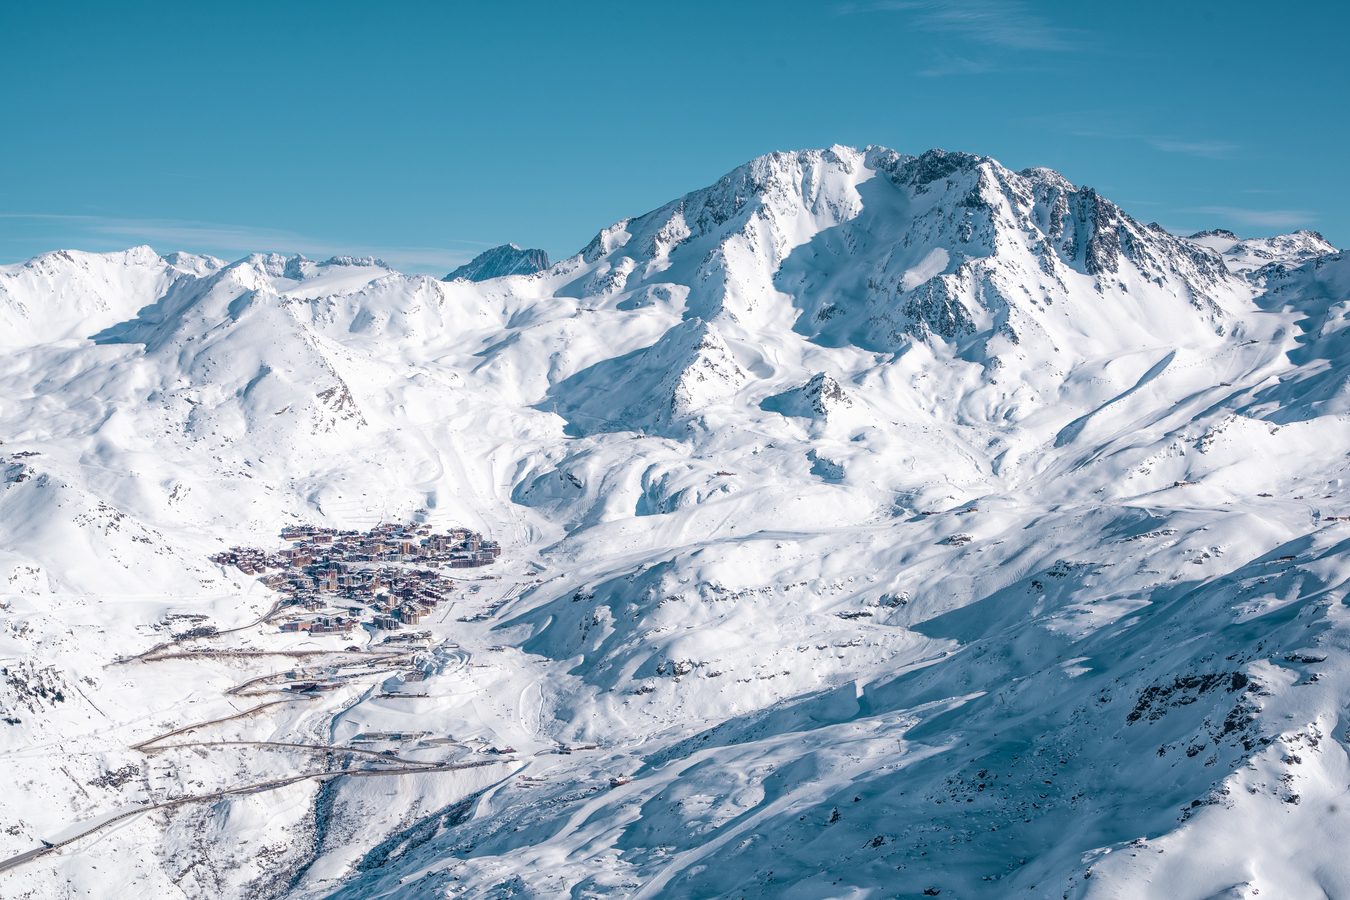 The resort of Val Thorens in Les 3 Vallées, the largest ski area in the world